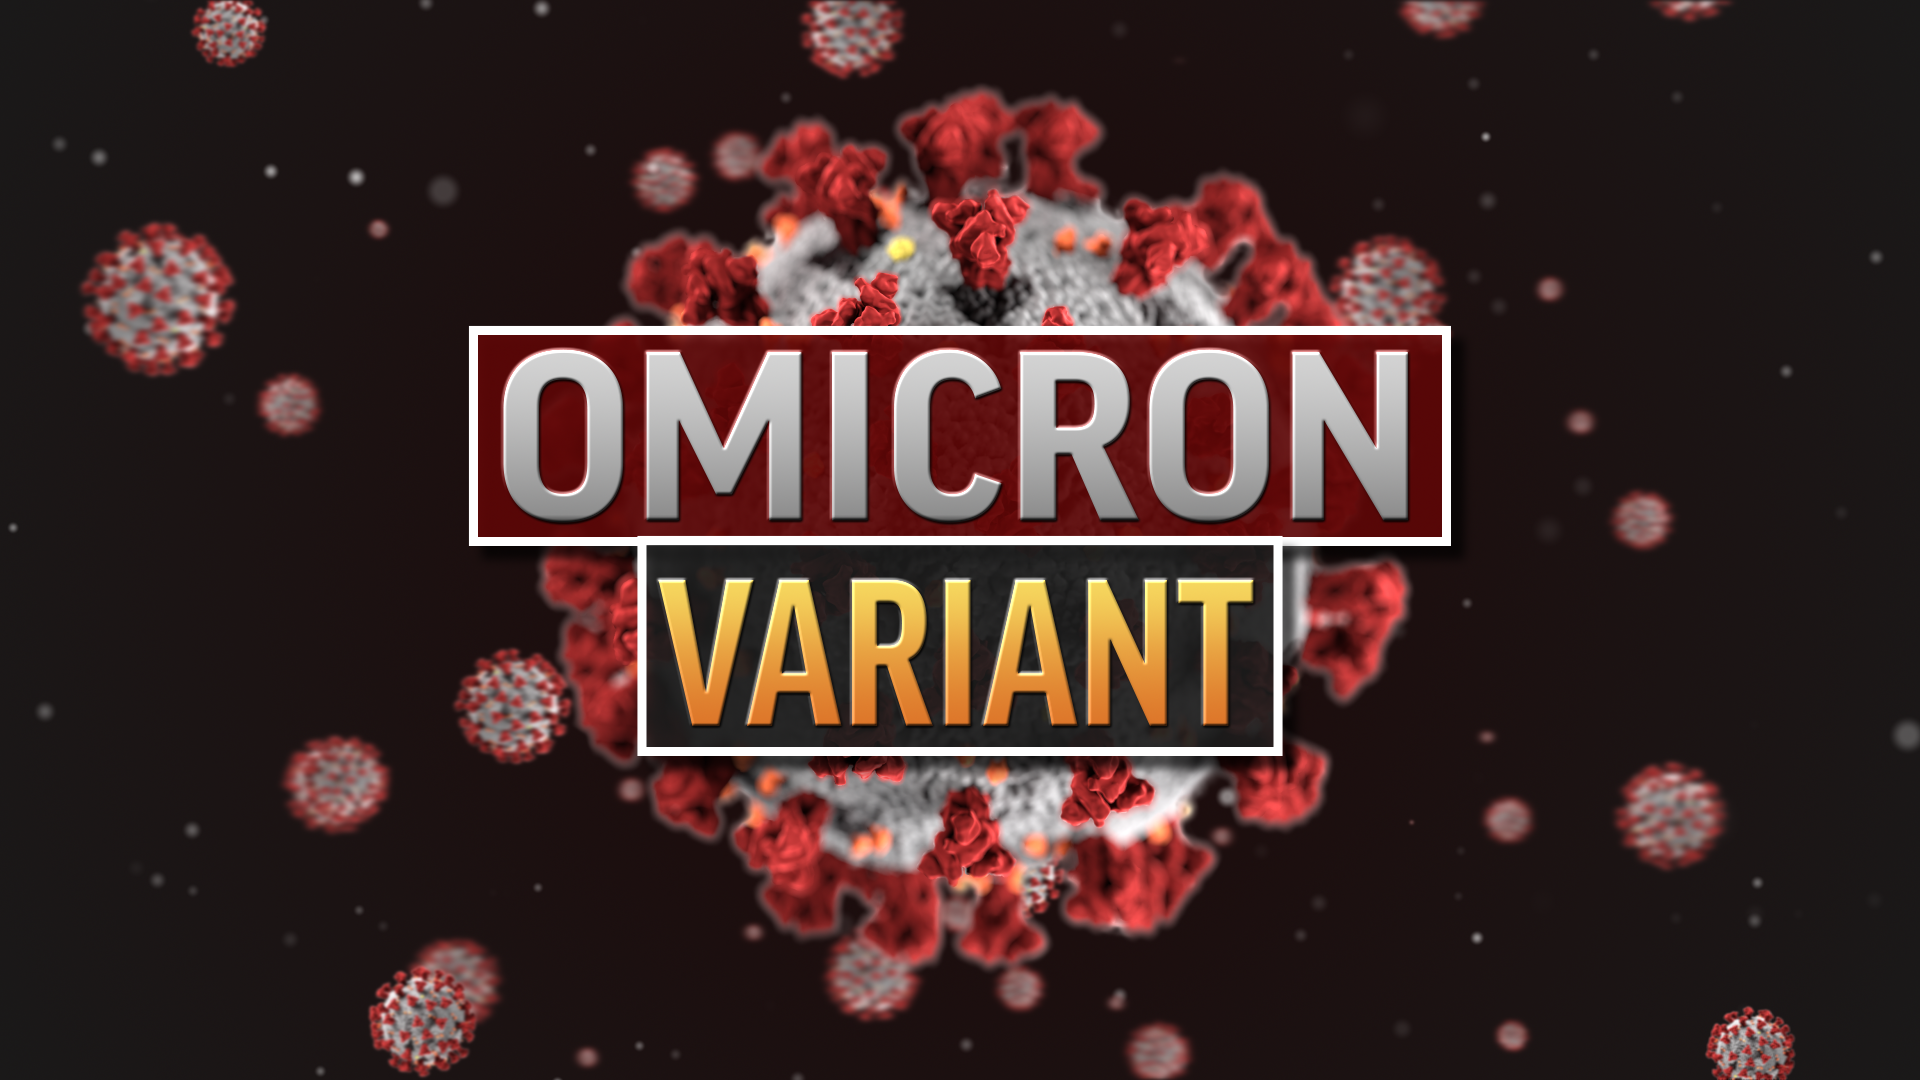 Case of omicron variant found in Western Colorado